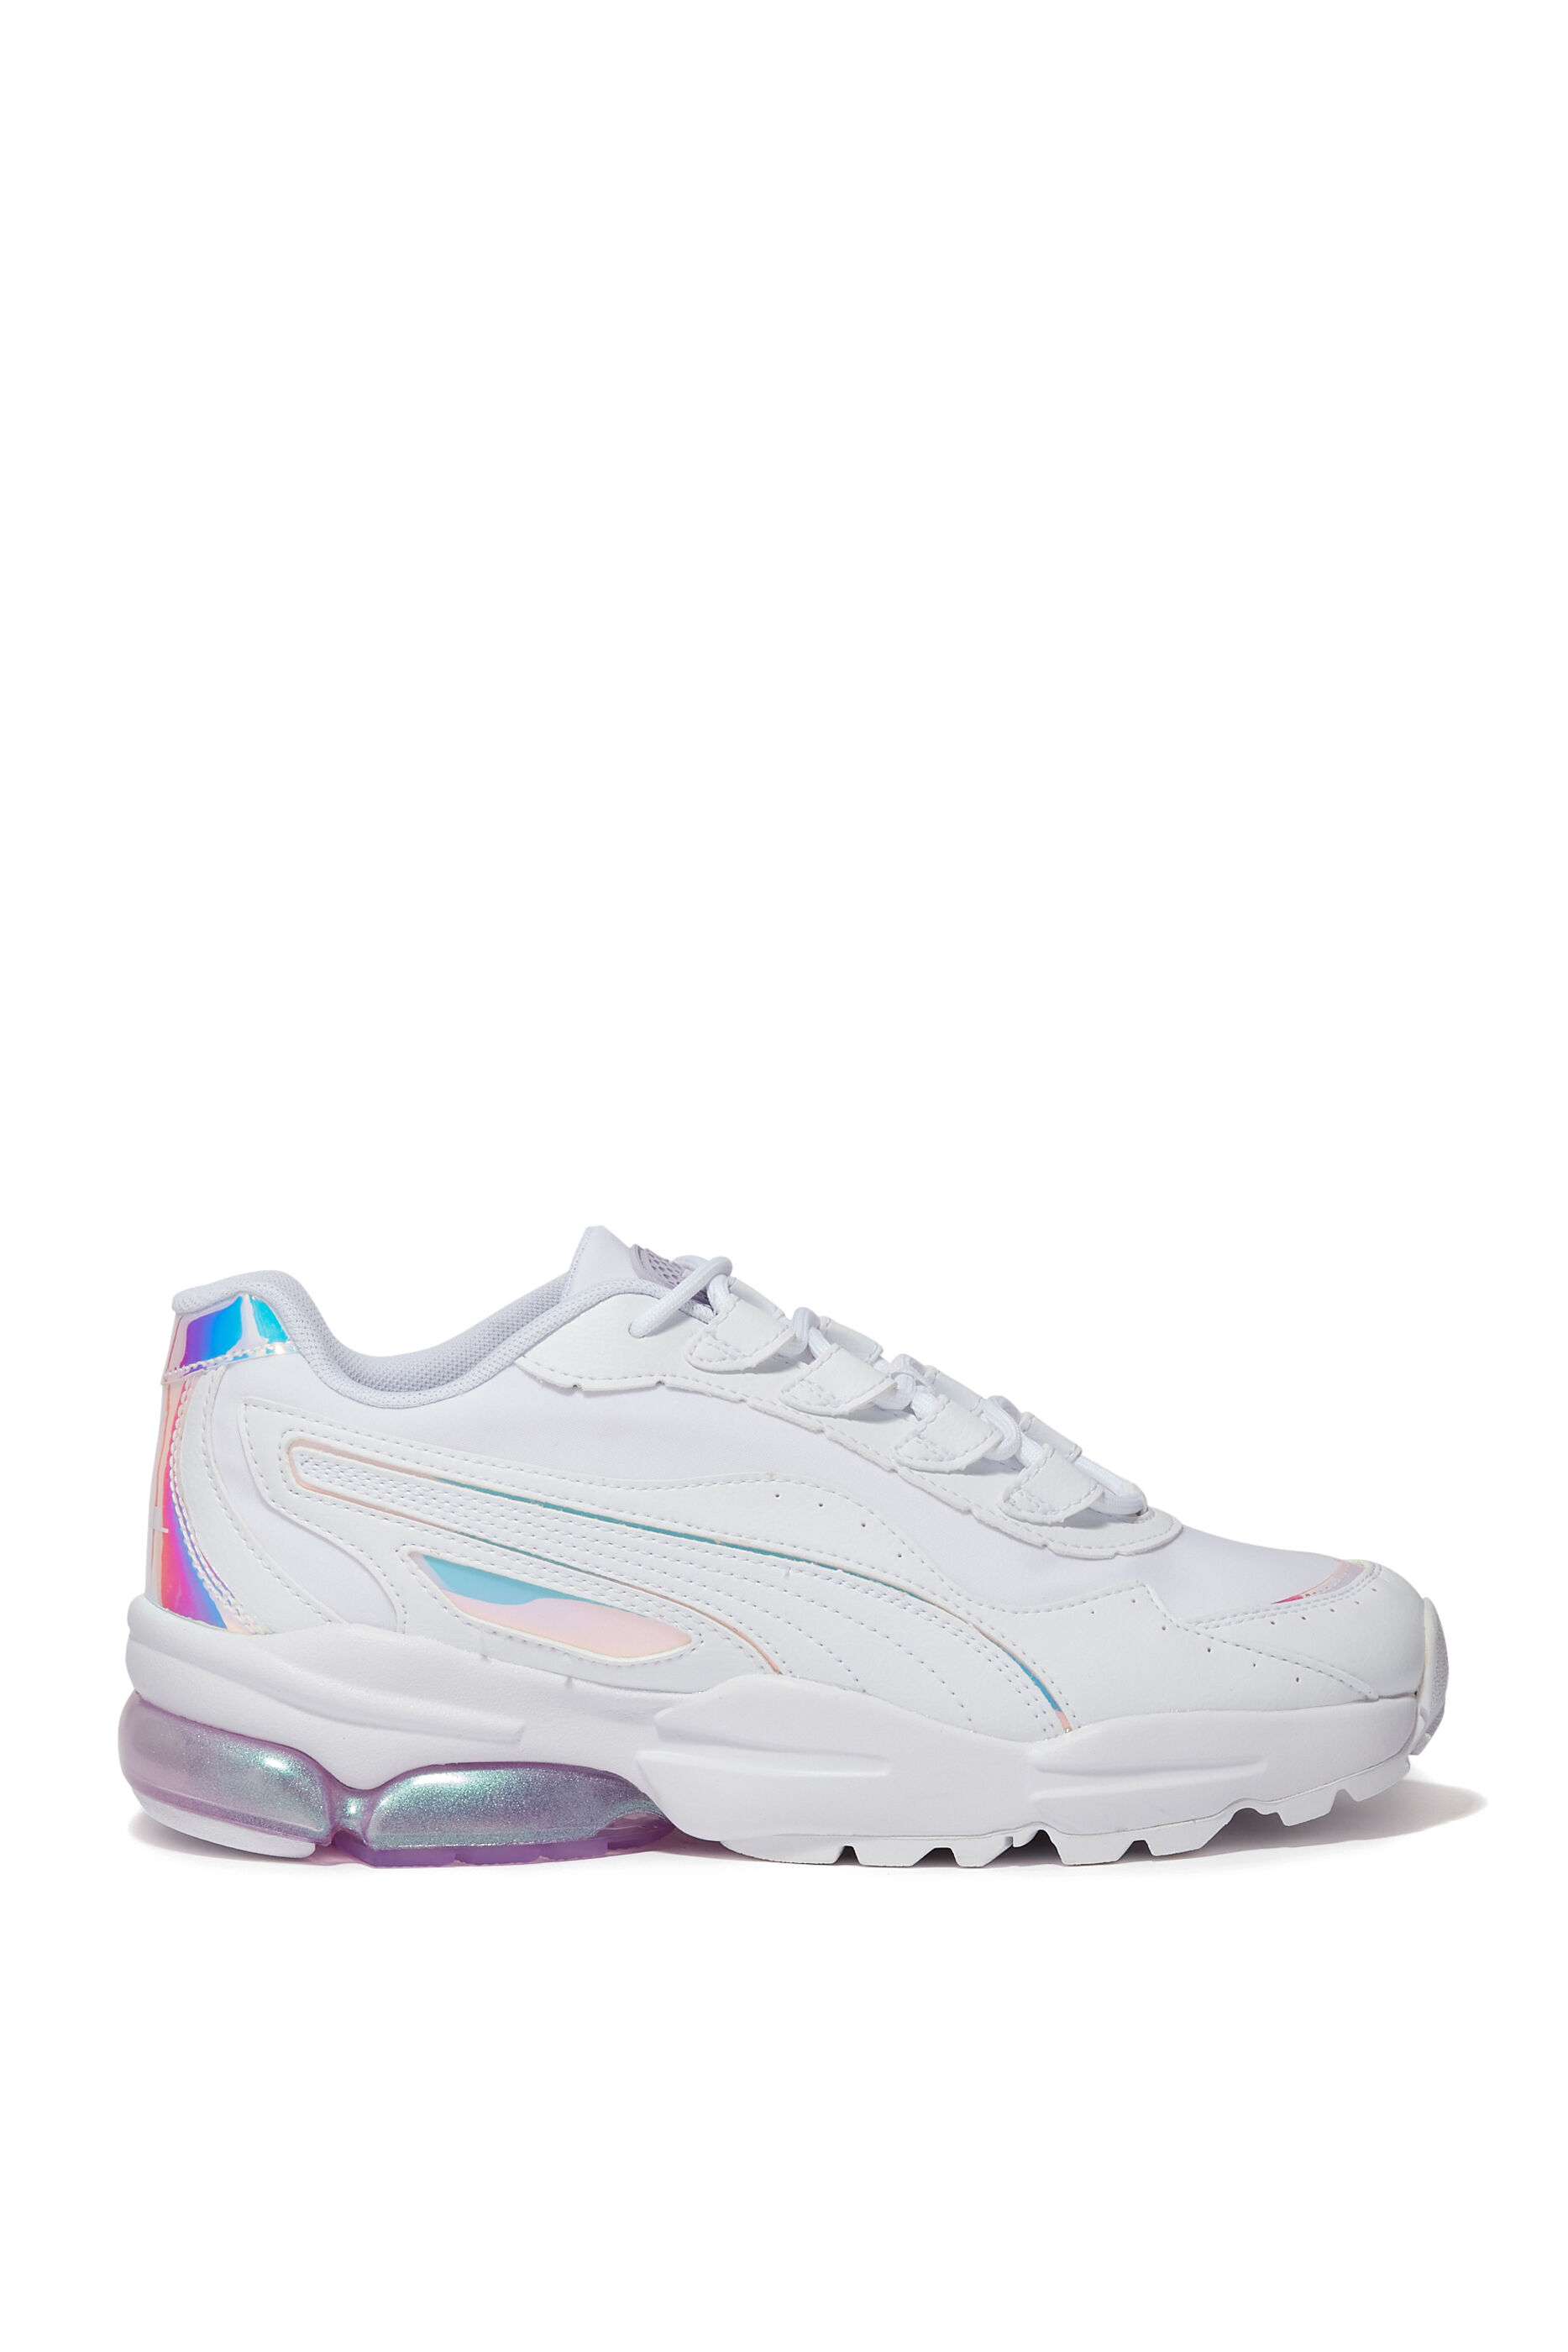 puma holographic sneakers